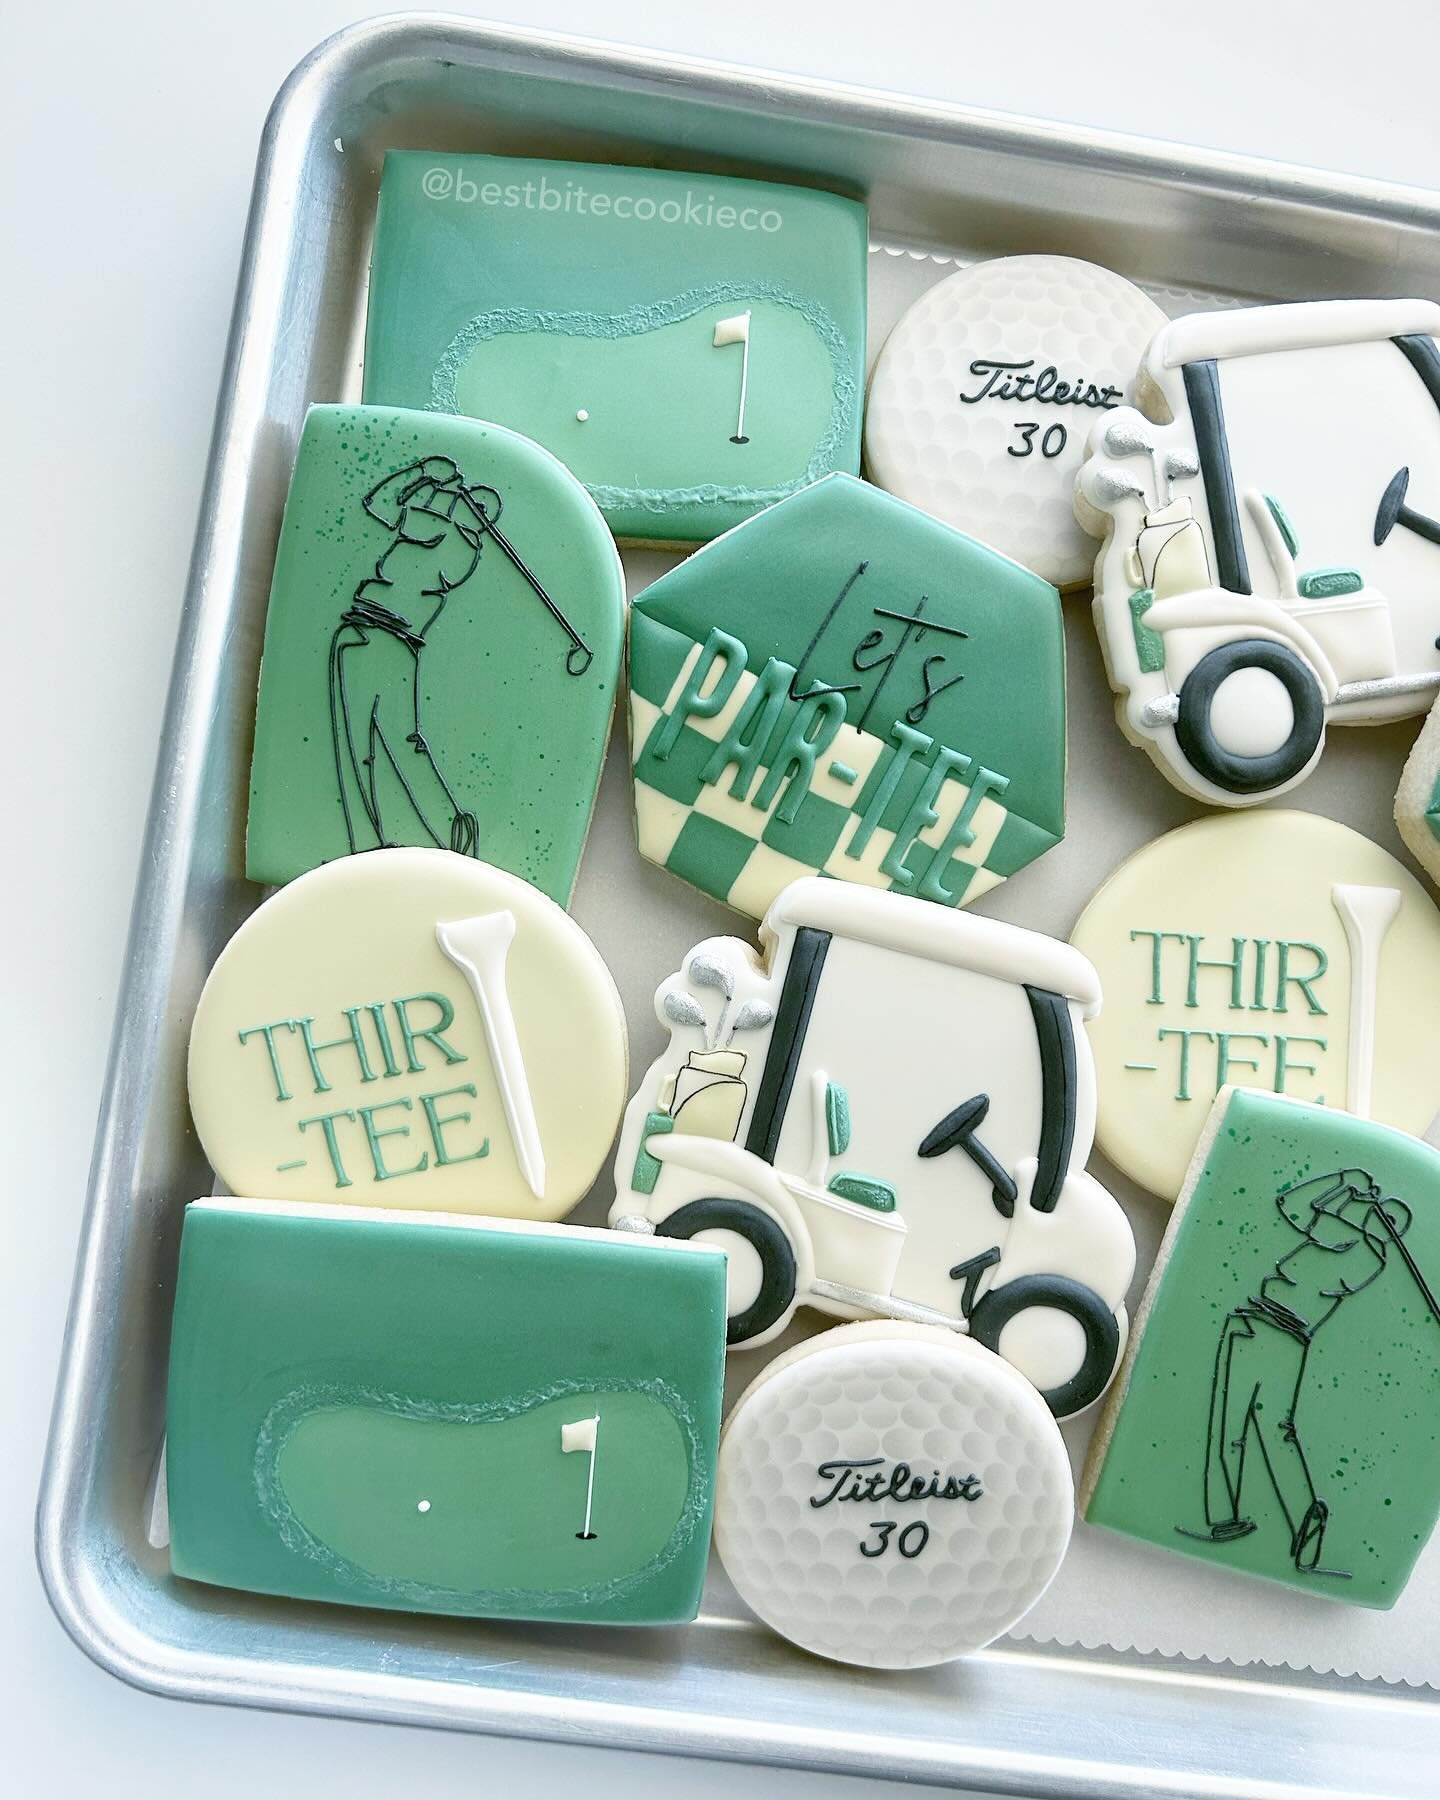 Thir-tee ⛳️ &mdash; I always love a good pun theme, especially if it&rsquo;s about golf!

✨Fun fact: My career before cookies was a professional golfer!
&bull;
&bull;
&bull;
#letspartee #golfcookies #30thbirthdaycookies #sugarcookies #decoratedcookie